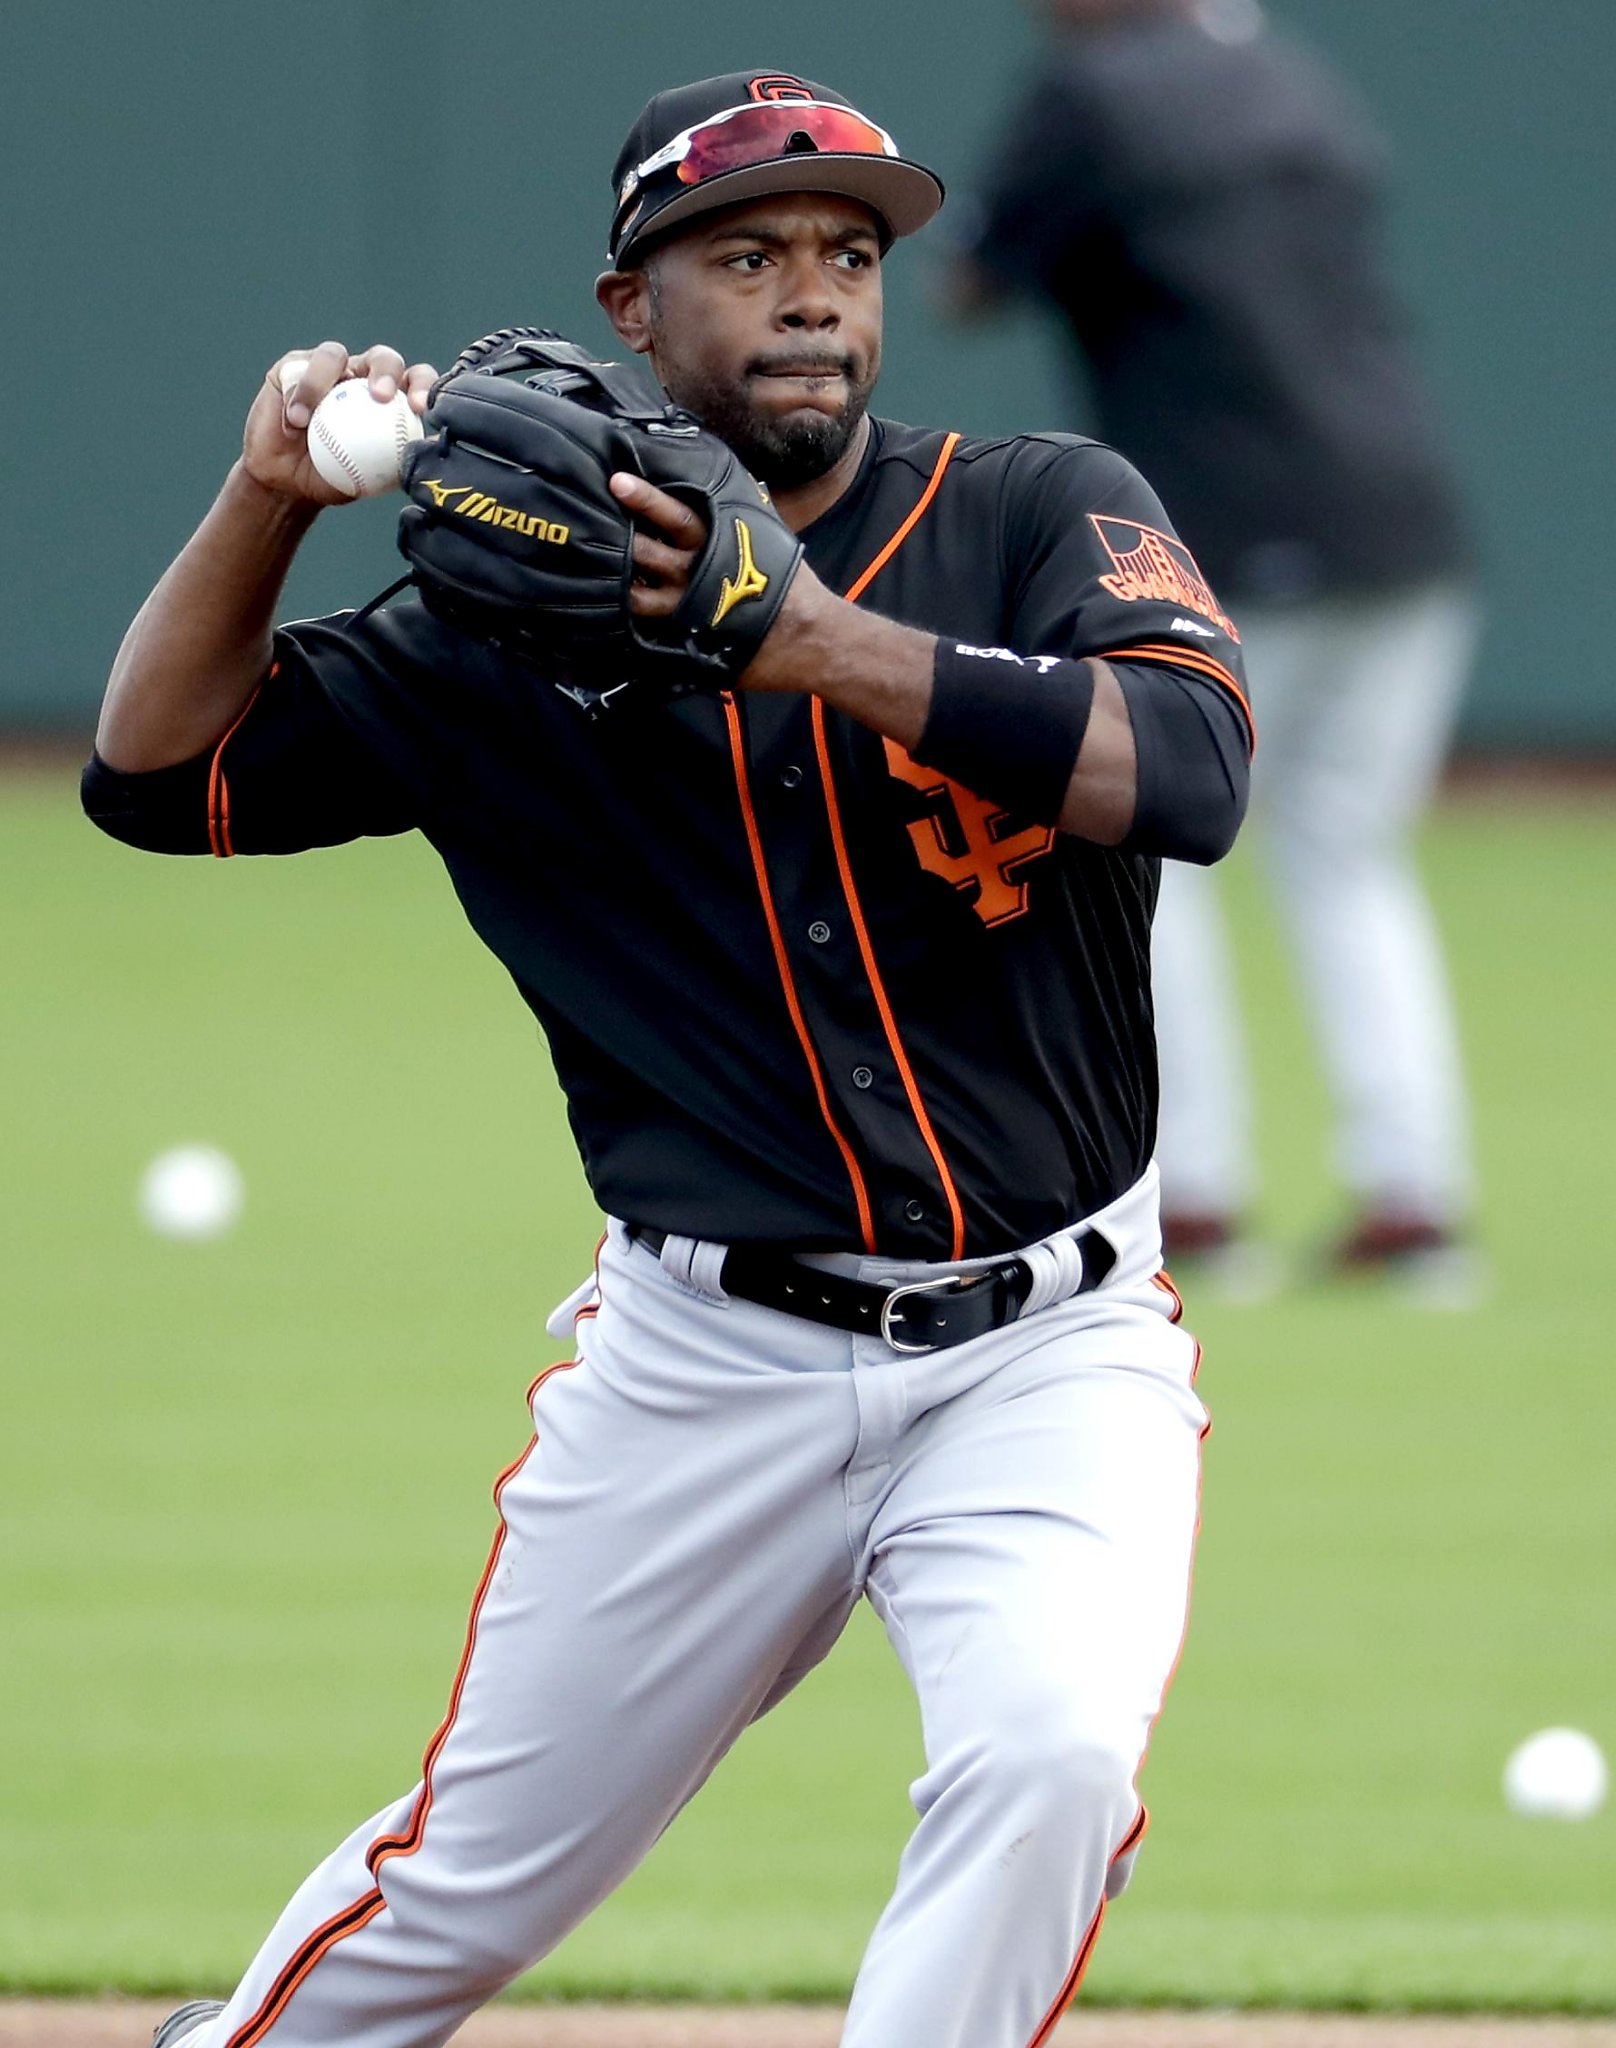 At 38, Jimmy Rollins determined to make the Giants: 'I don't have